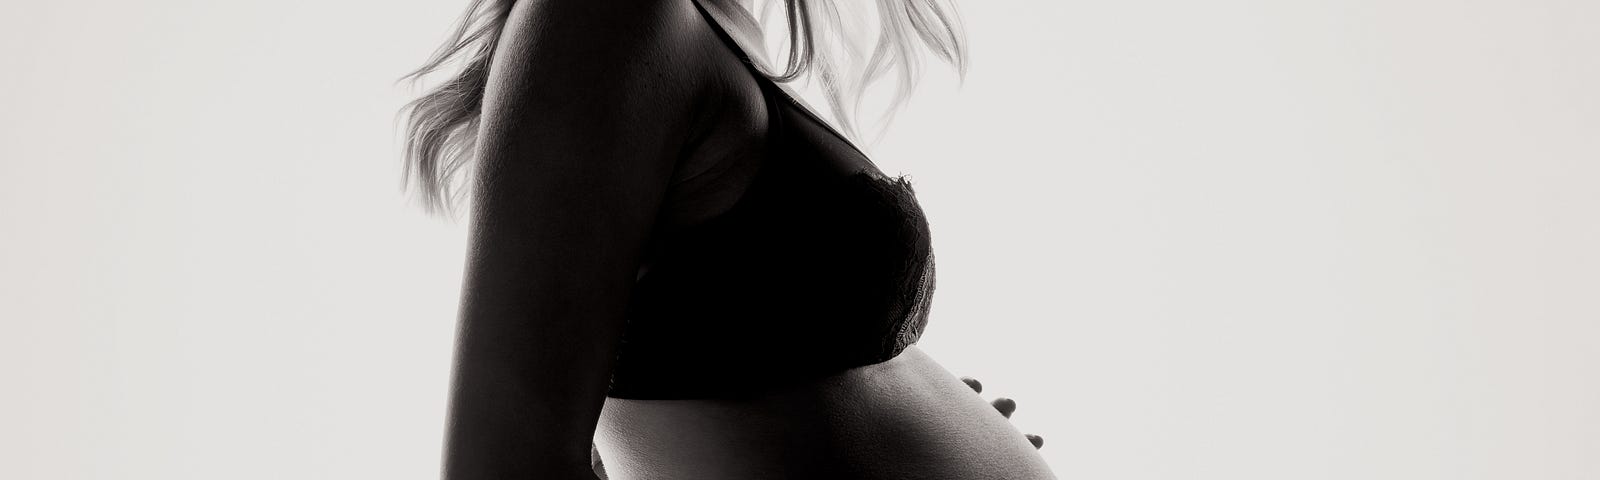 A pregnant woman in backlight.